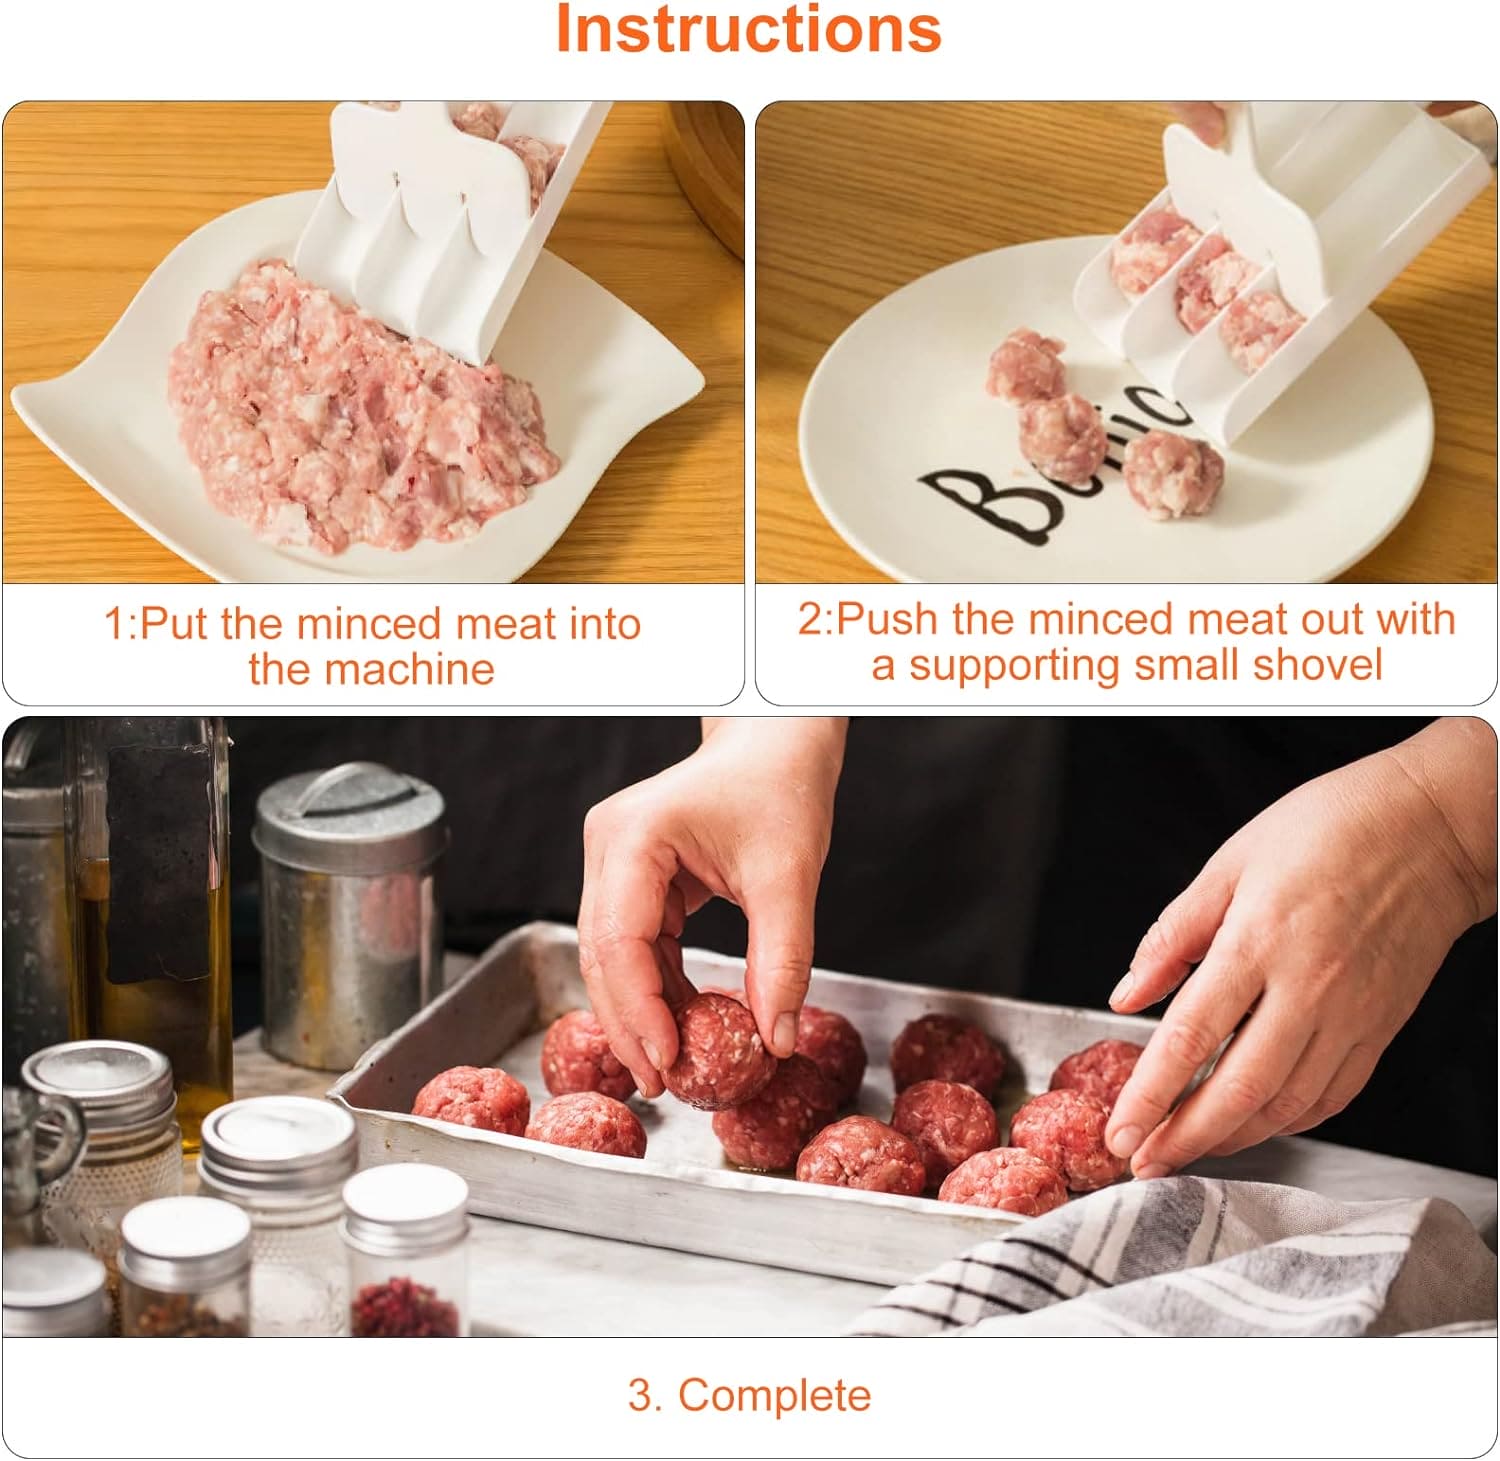 Triple Meat Ball Maker, Meat Tool With Spoon, Fried Fish Beef Meat Making Balls Mold, Kitchen Meatballs Scoop, Home Cooking Tool, Triple Meat Club Maker with Cutting Spatulas, Non Stick Plastic Apparatus Maker Clip